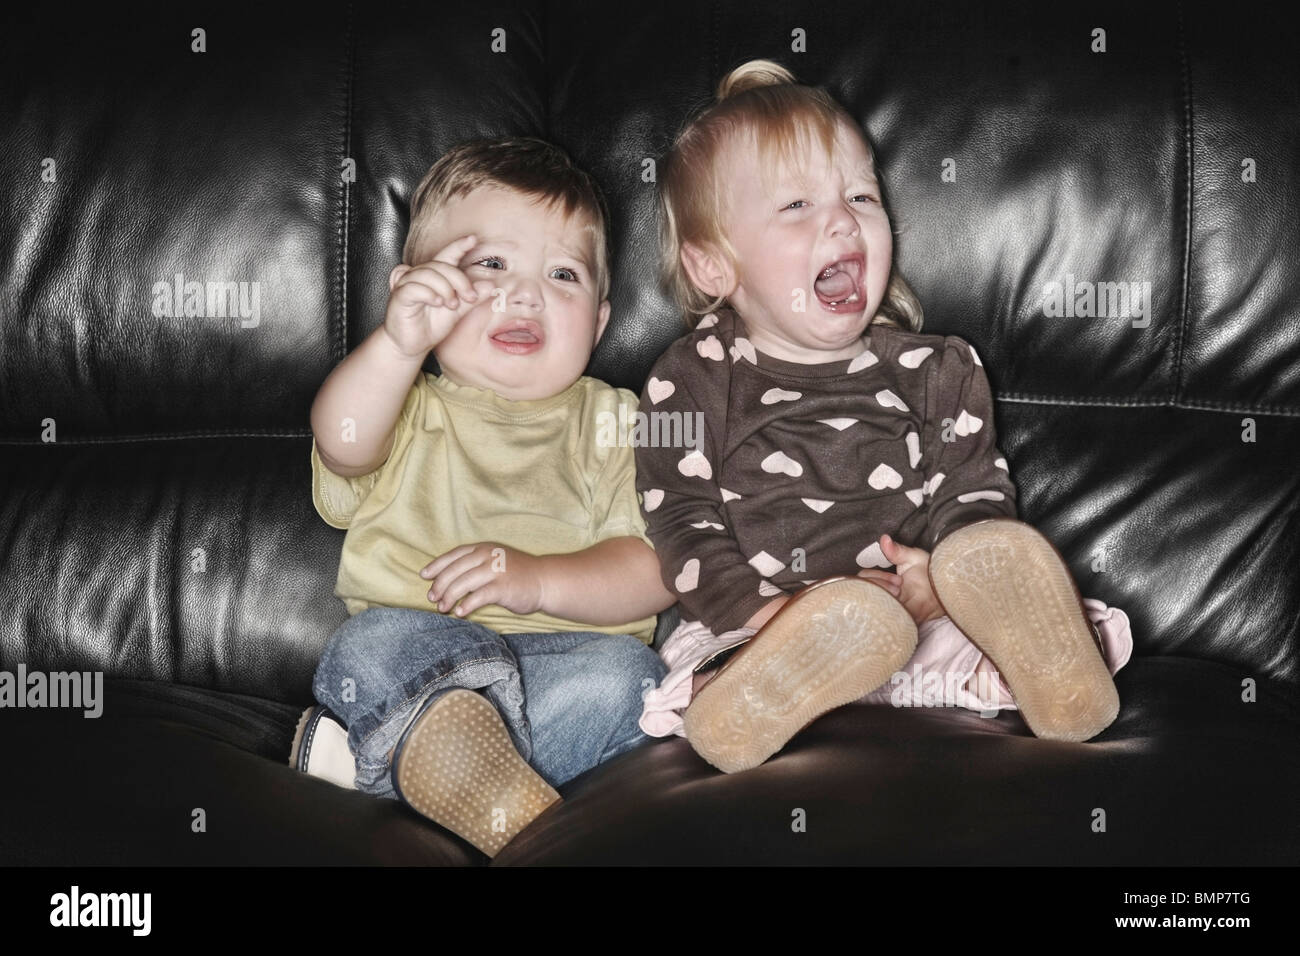 Edmonton, Alberta, Canada; Two Young Children Sitting On The Couch Together And Crying Stock Photo